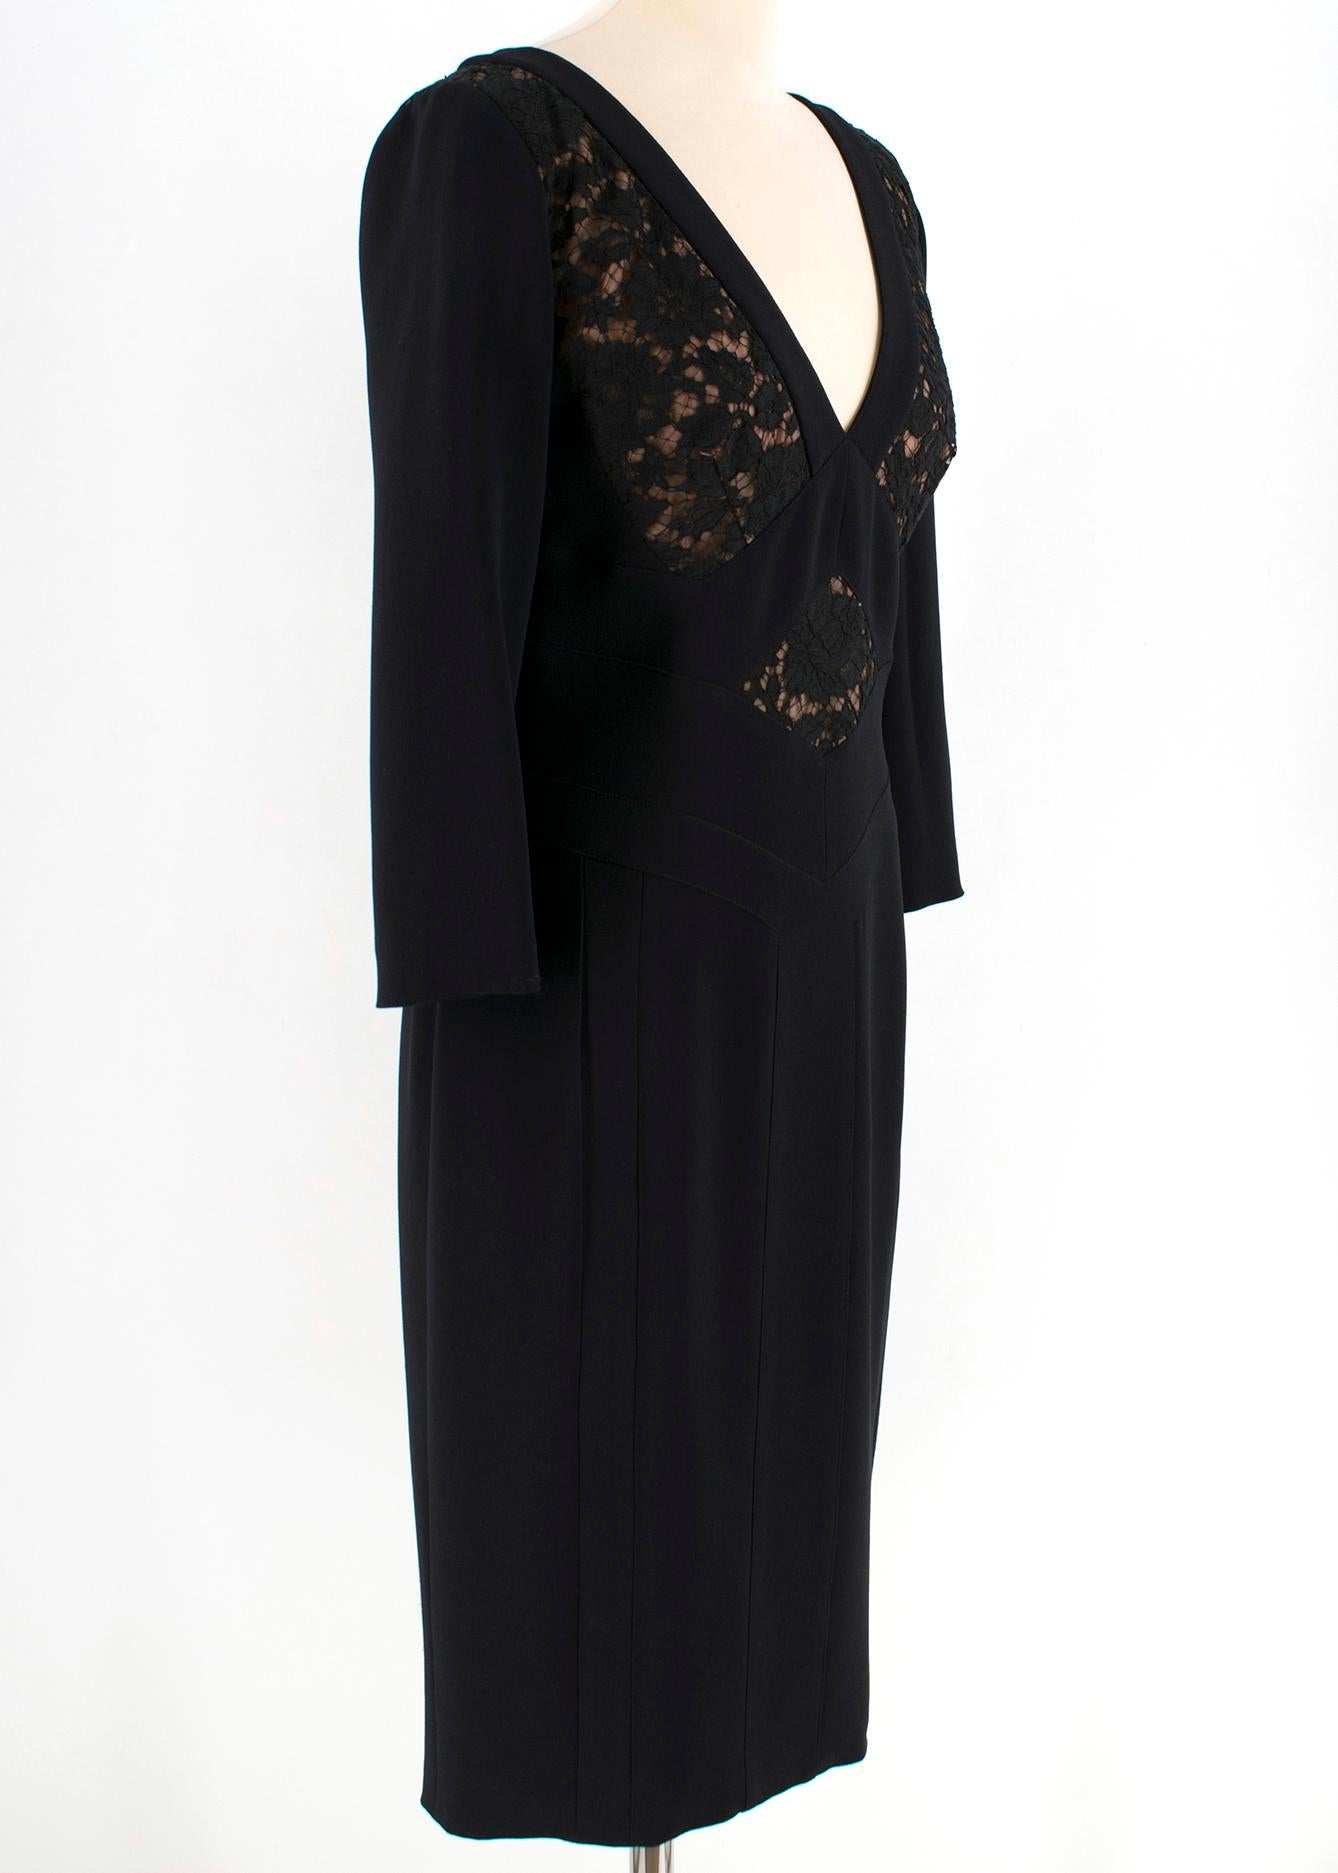 Elie Saab Black Lace Panelled Double Zip Dress 

Black mid sleeve dress with a deep v-neck 
Gold-tone centre back double zip closure
Lace panels to the bust and back with a nude underlay
Straight hem
Fitted silhouette 

Measurements are taken laying